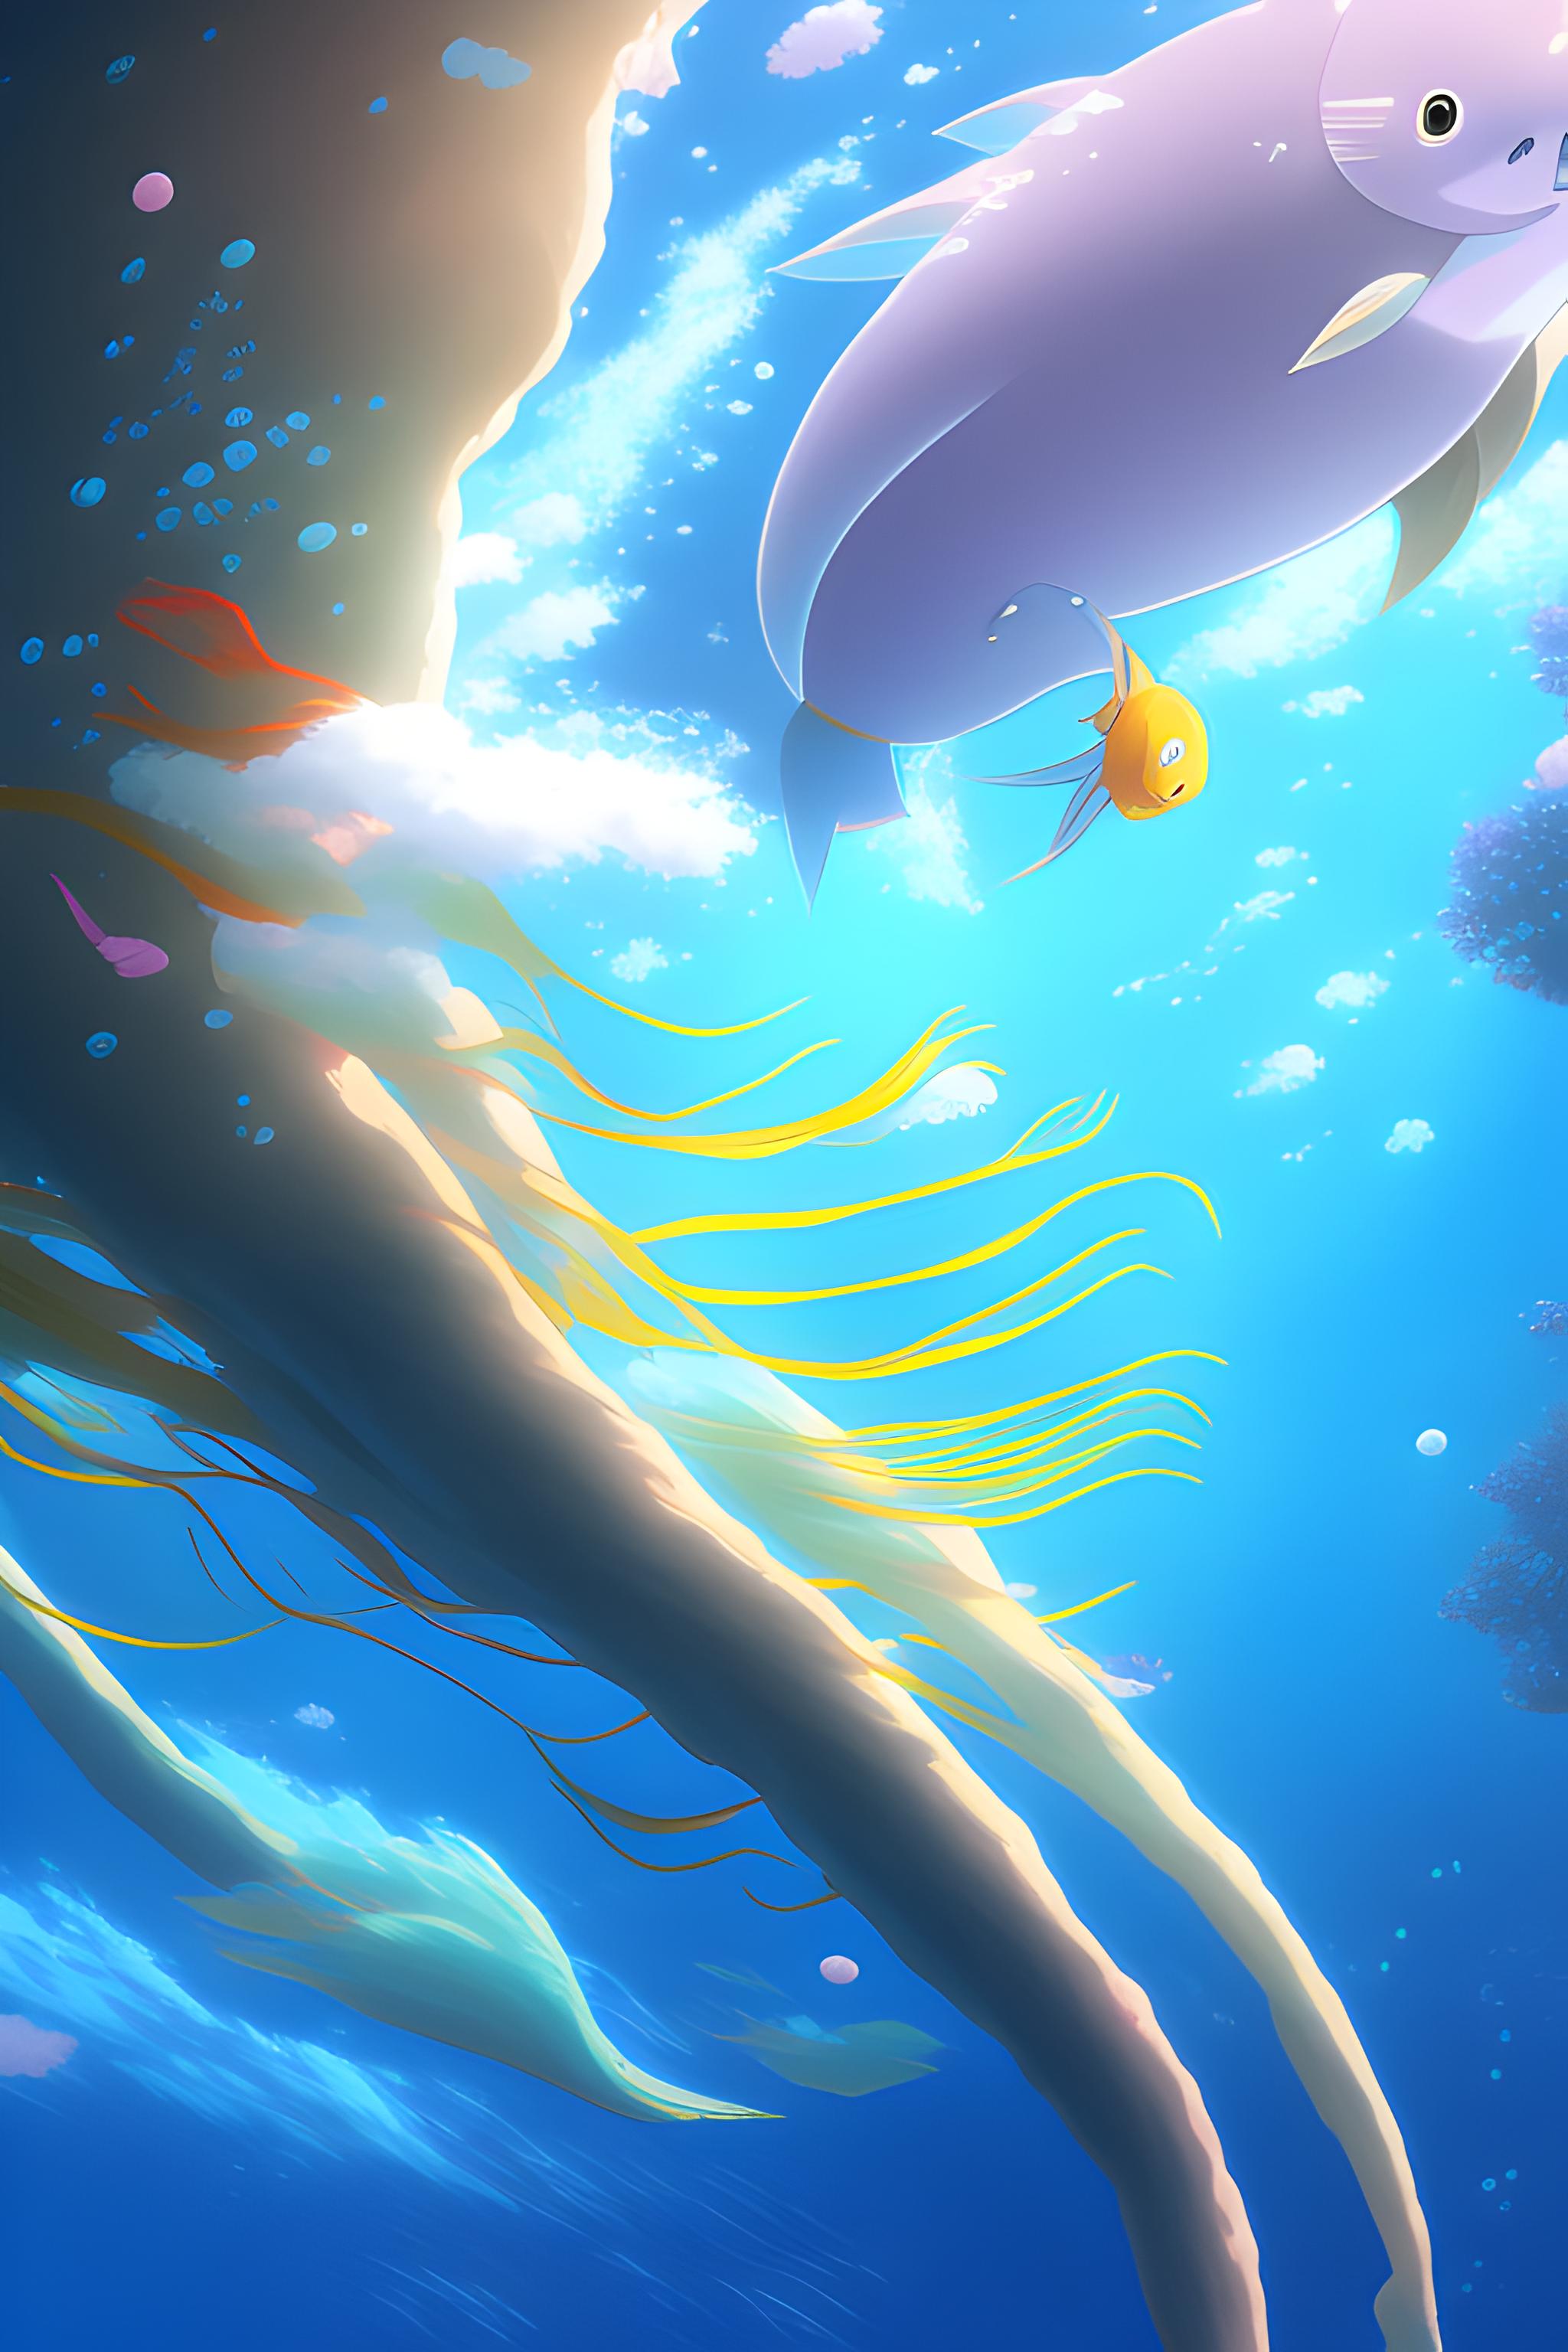 Smoky Design anime boys anime water underwater sweets hd wallpaper Paper  Poster Price in India - Buy Smoky Design anime boys anime water underwater  sweets hd wallpaper Paper Poster online at Flipkart.com